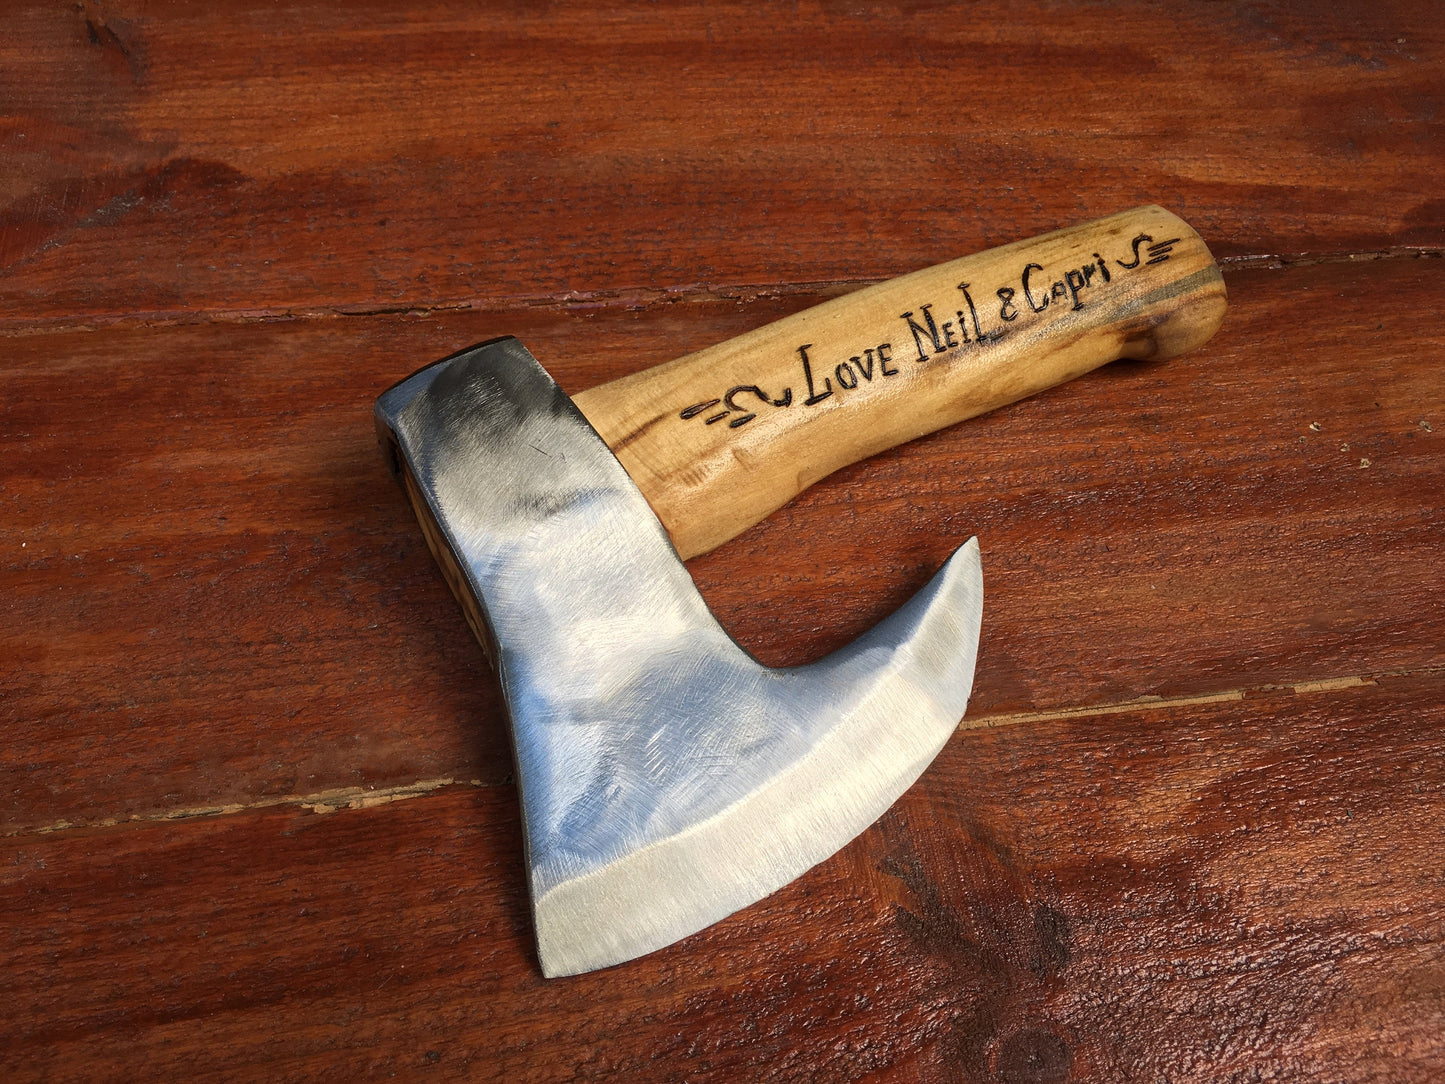 Viking axe, mens gifts, medieval axe, tomahawk, camping, hiking, hunting, iron gift for him, chopping axe, gifts for men, manly iron gifts